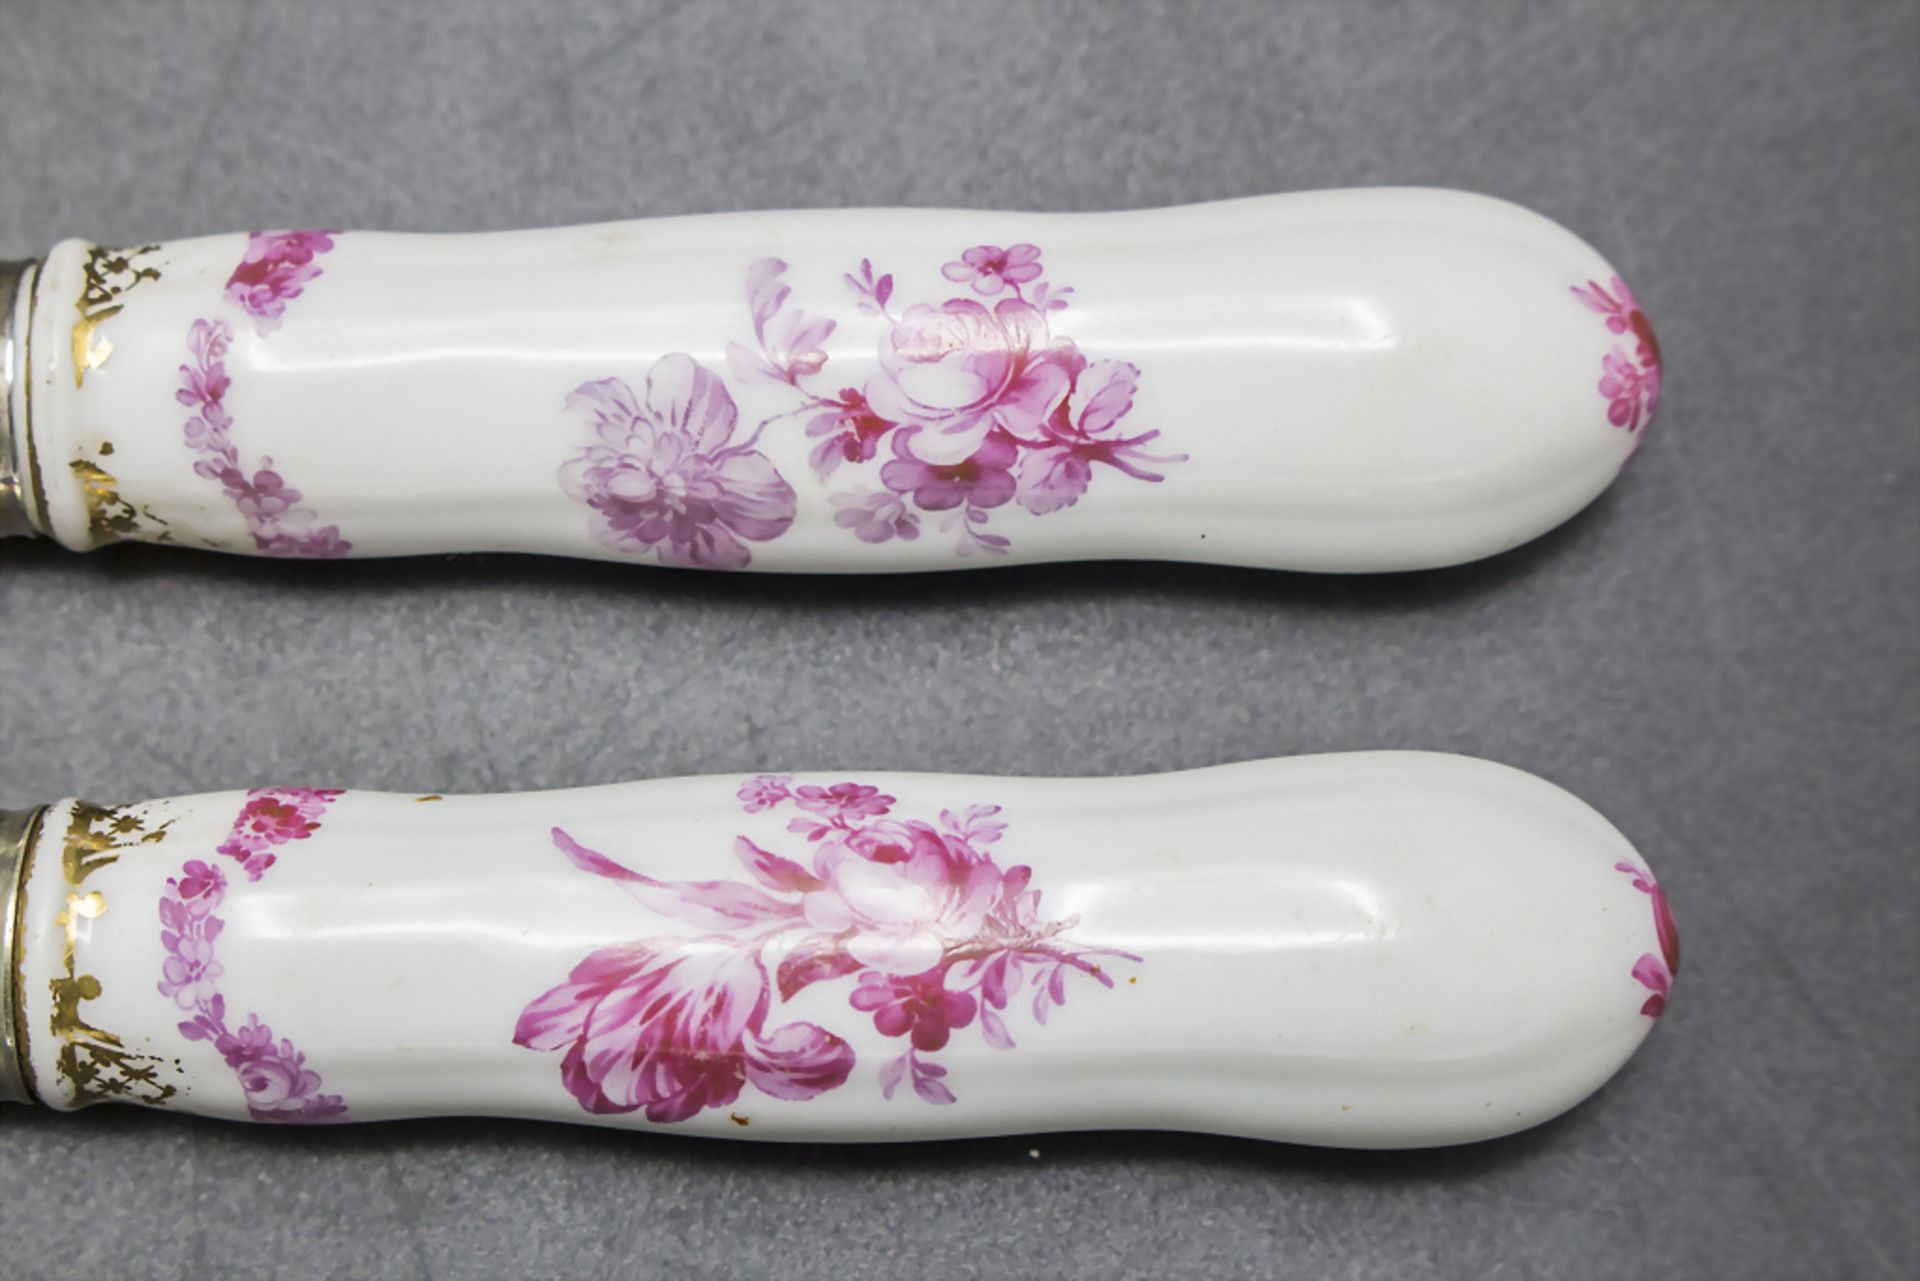 Paar Messer mit Purpurmalerei und Silberklinge / Two knives with purple flowers and silver ... - Image 4 of 4